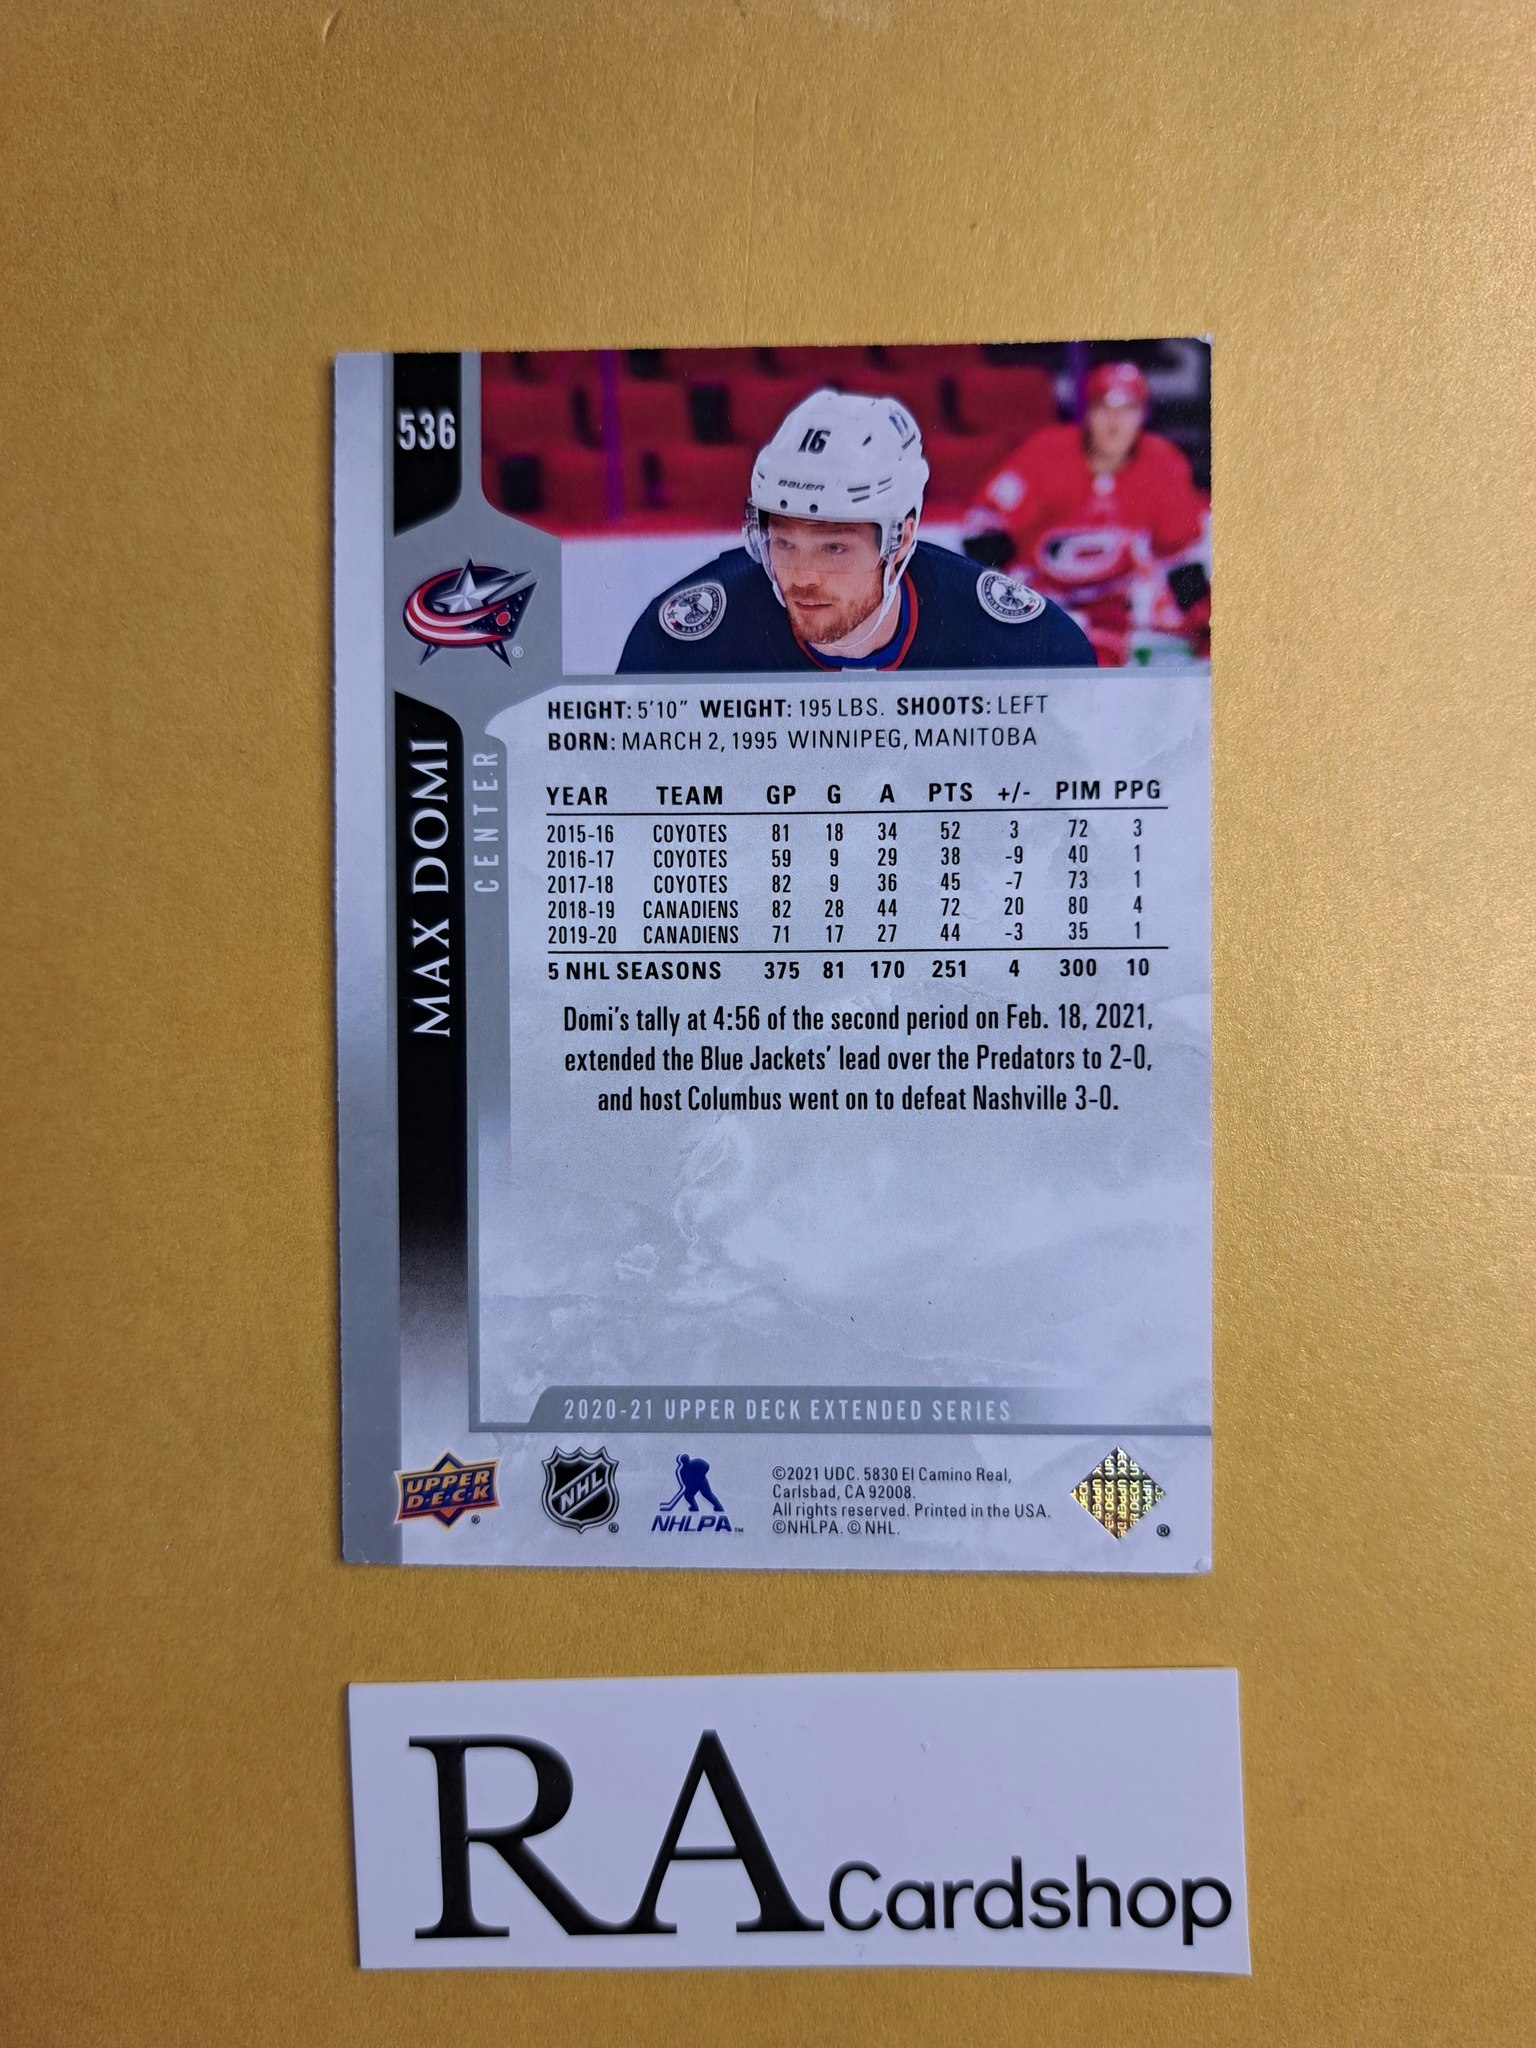 #536 Max Domi 2020-21 Upper Deck Extended Series Hockey